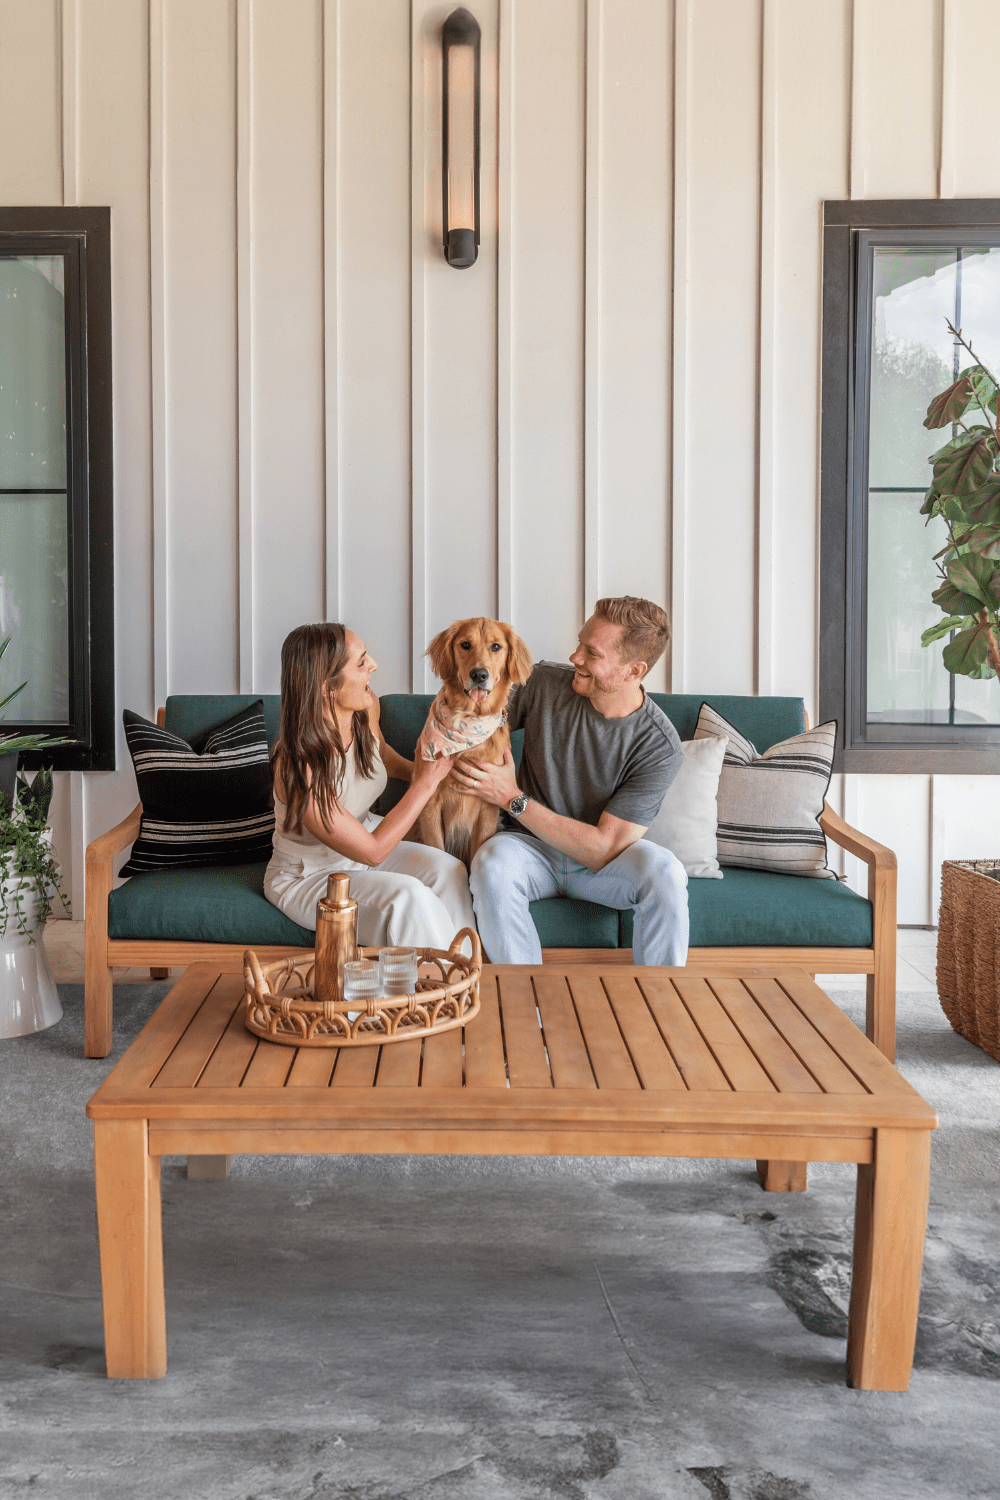 Designing the Perfect Pet-Friendly Outdoor Space with Heated Furniture